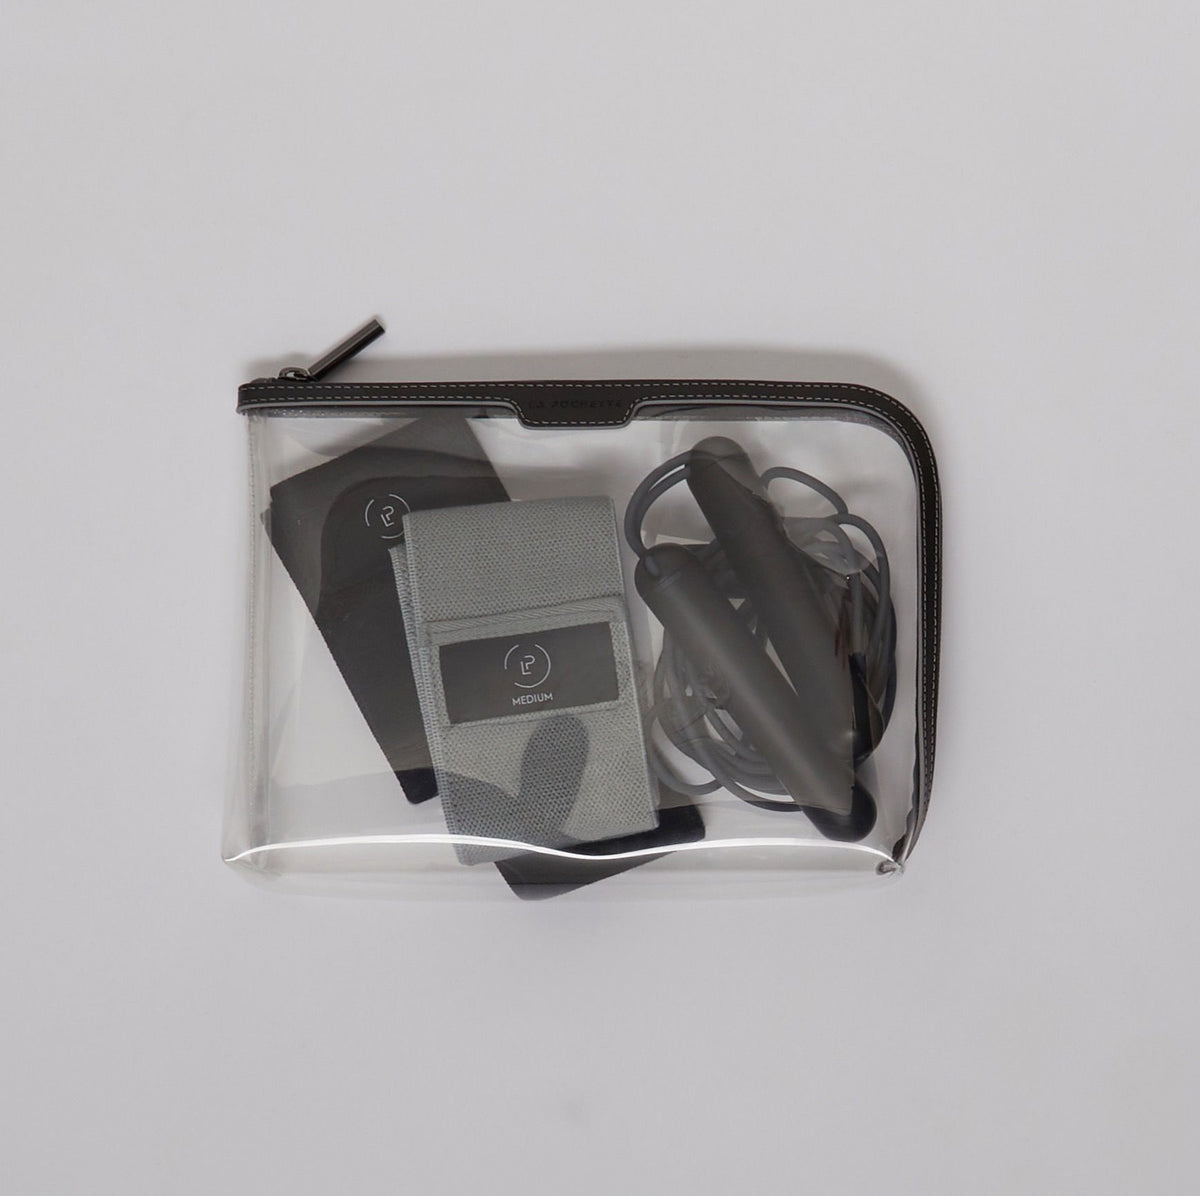 Large Anywhere Everywhere Pouch in Pewter Ink colourway containing resistance bands and Tanagram SmartRope